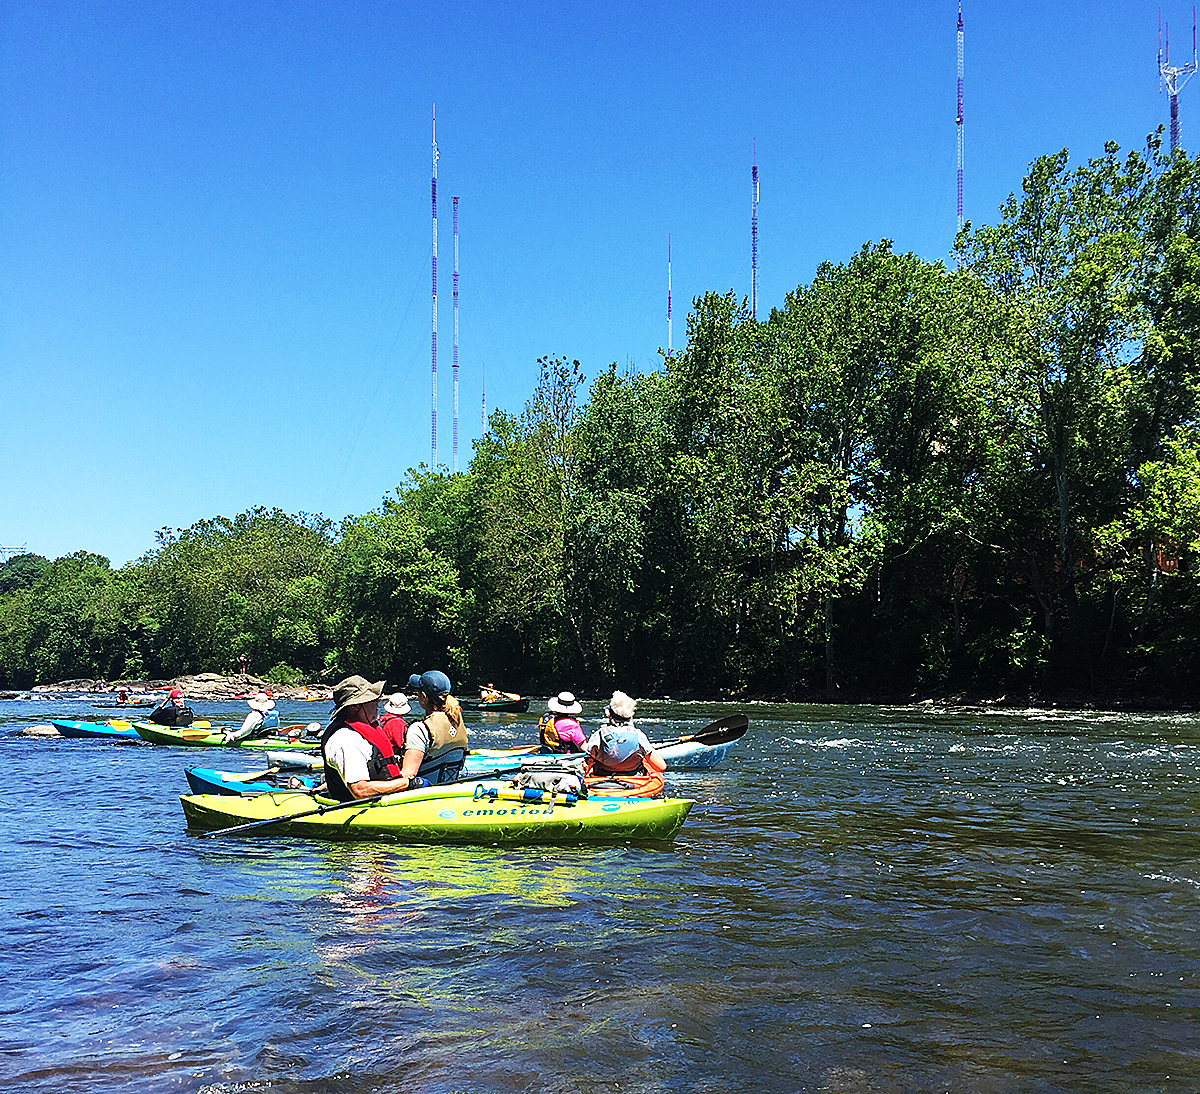 Schuylkill River boaters paddle the waters just below Flat Rock Dam. Issues with water quality in Rio de Janeiro, home of the 2016 Summer Olympics, have local water sport enthusiasts thinking about the value of clean water.